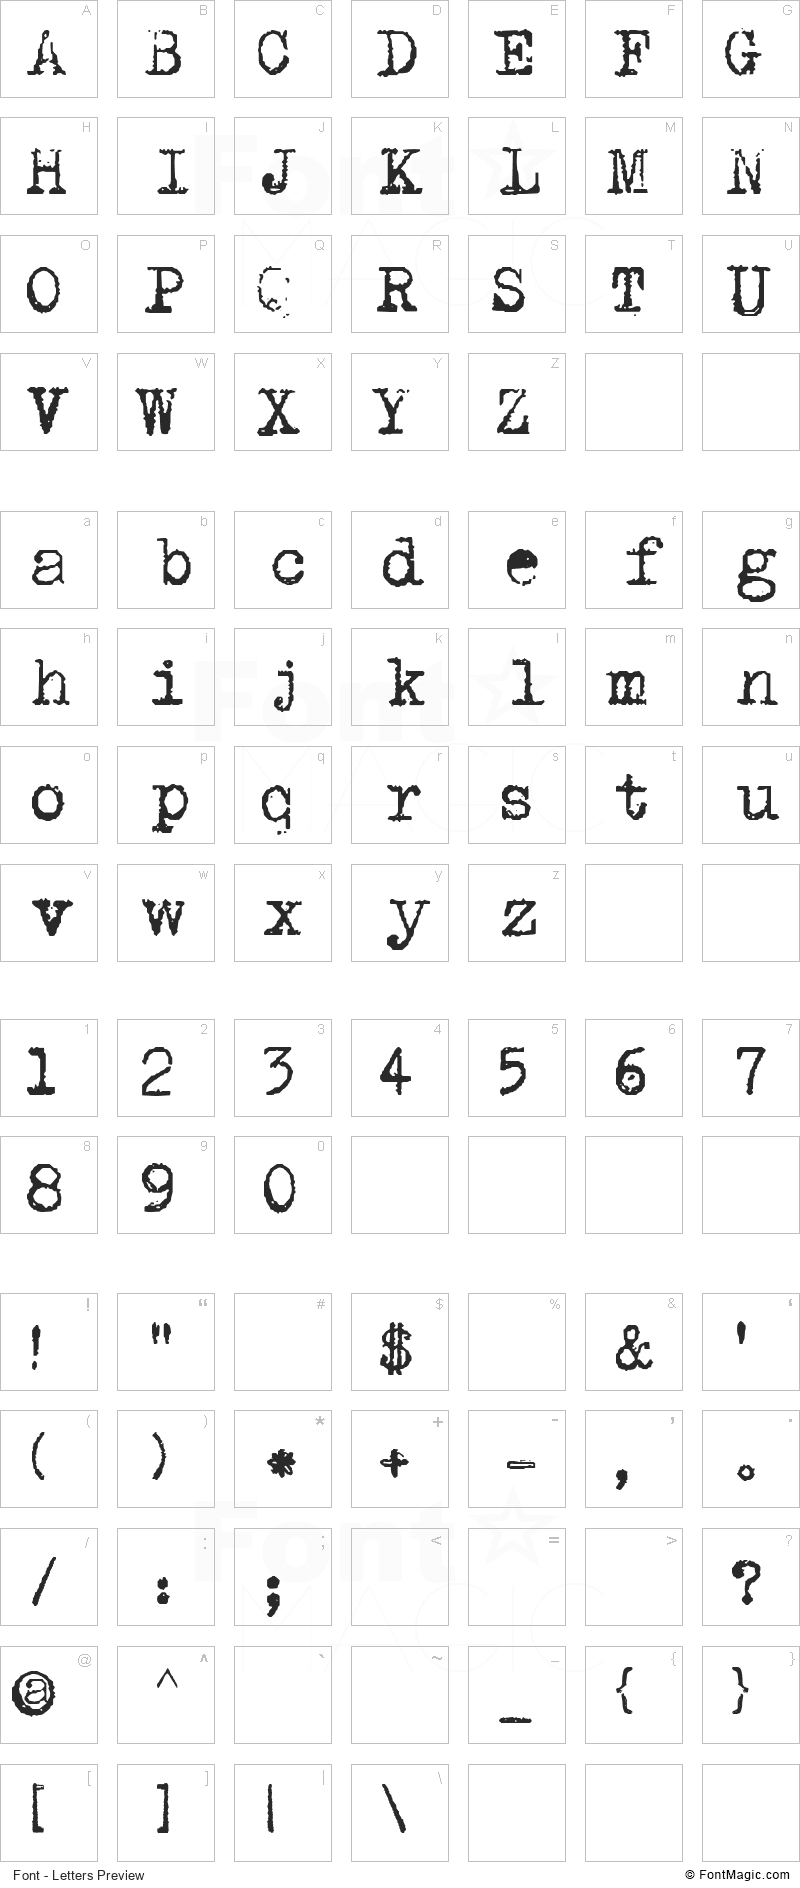 DK P.I. Font - All Latters Preview Chart